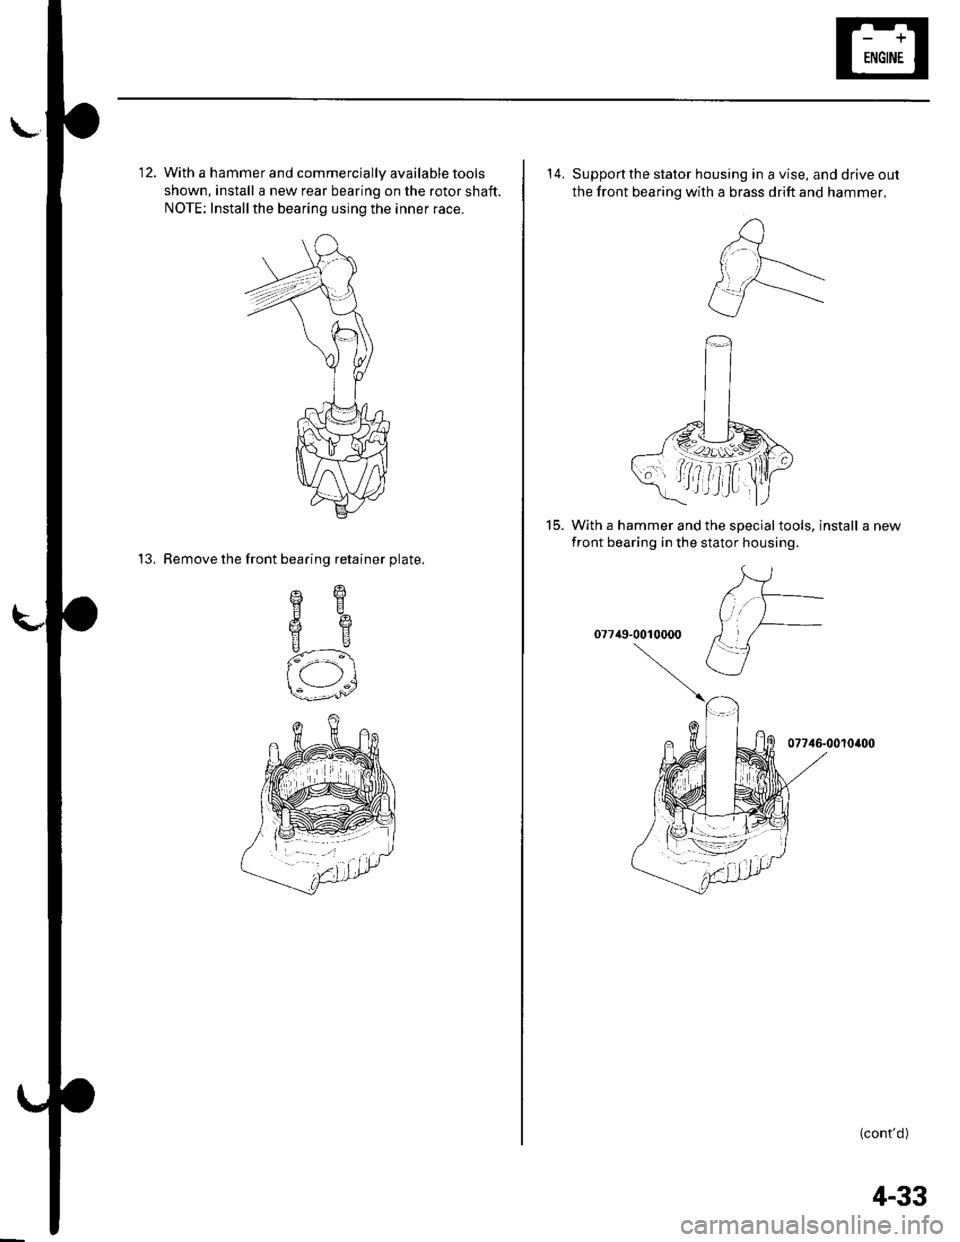 HONDA CIVIC 2003 7.G User Guide \-
12. With a hammer and commercially available tools
shown, install a new rear bearing on the rotor shaft.
NOTE: Installthe bearing using the inner race.
13. Remove the front bearing retainer plate.
